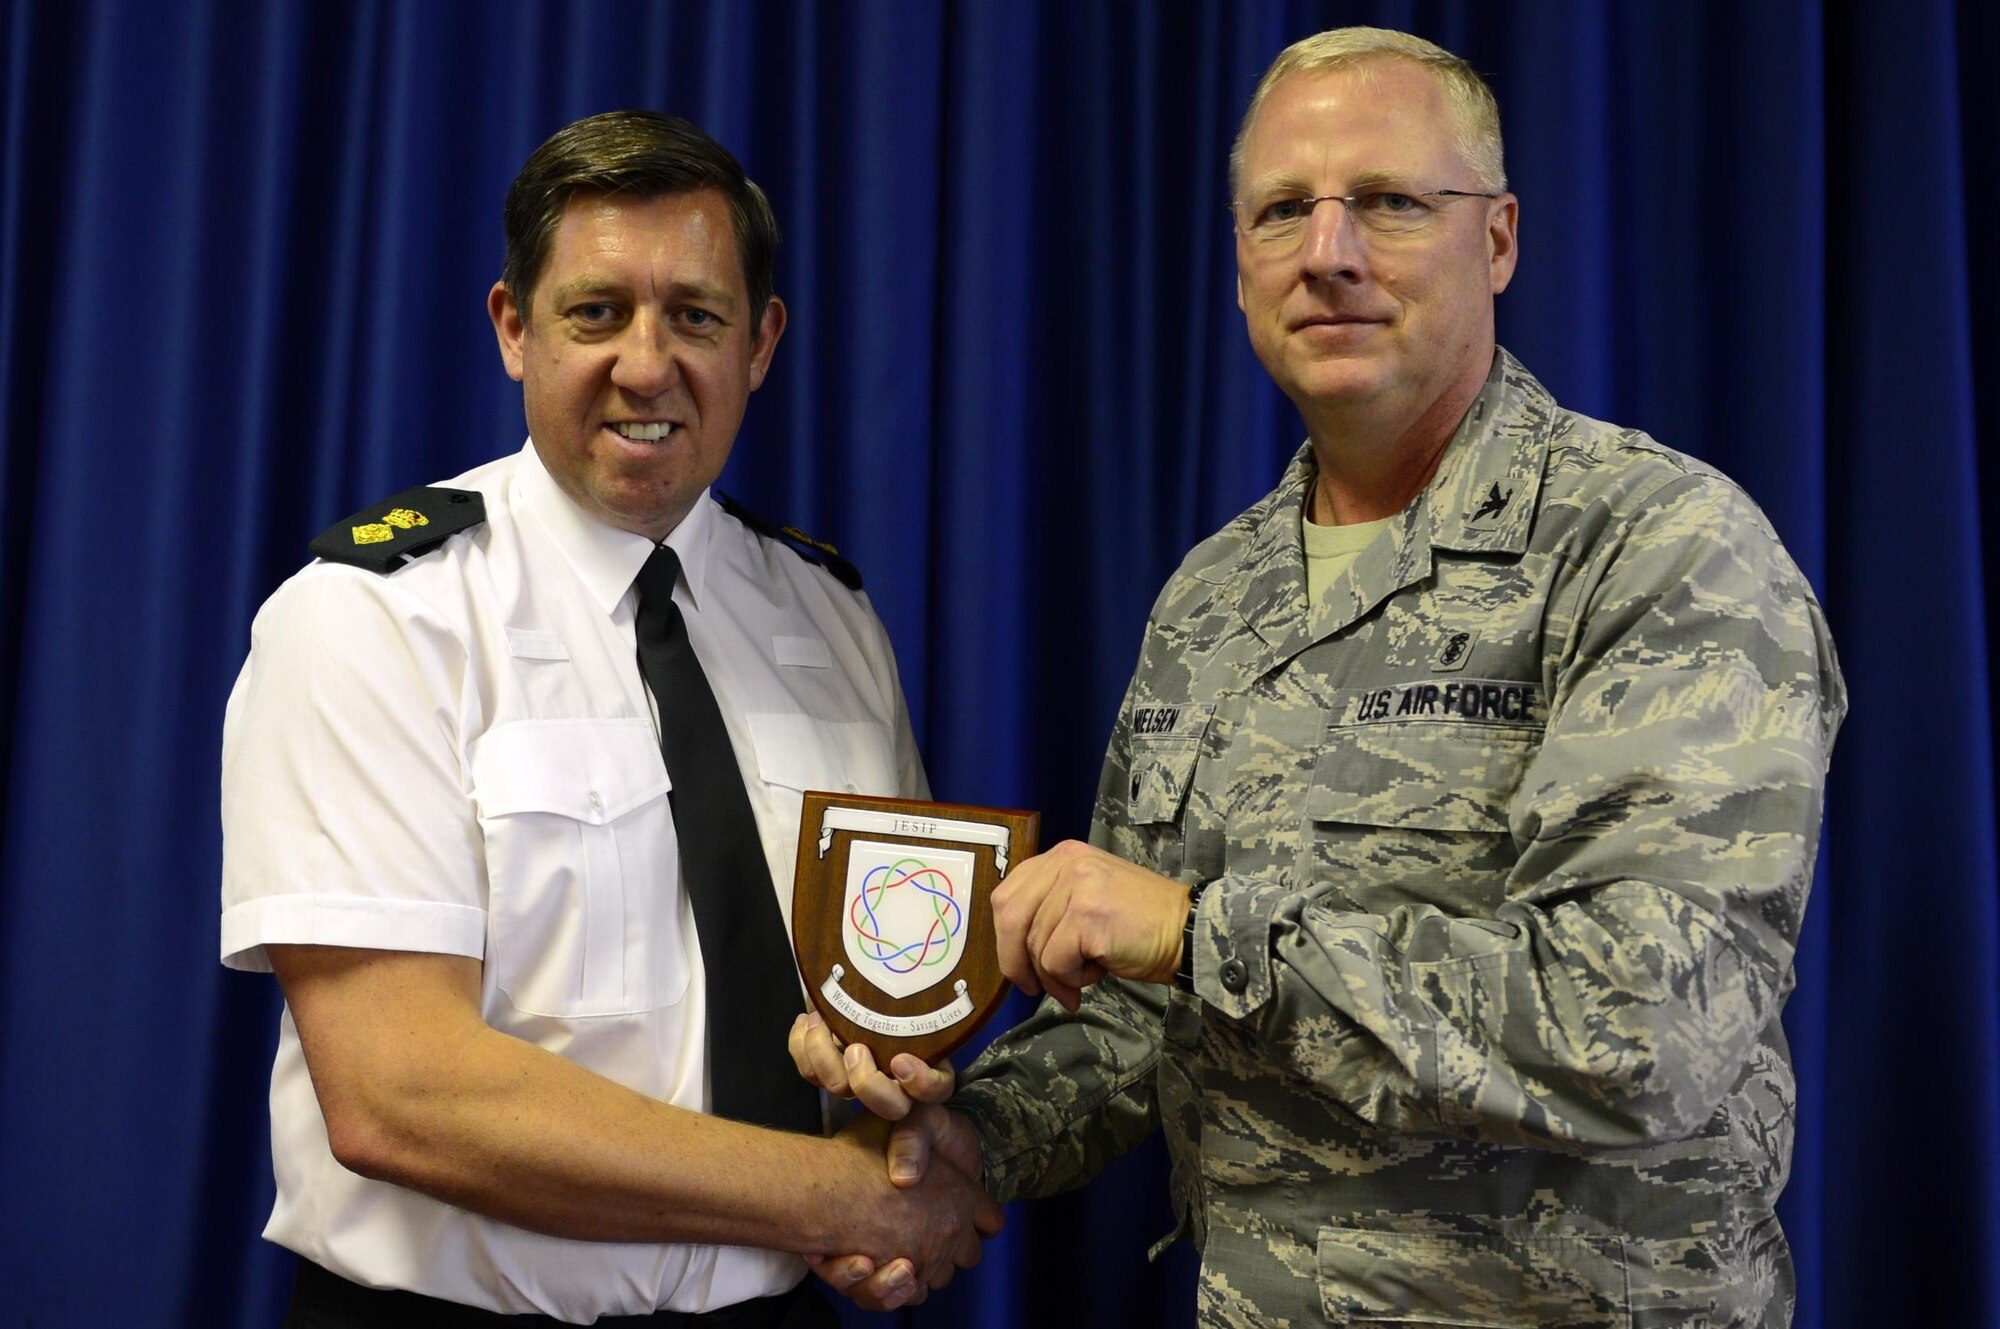 Carl Daniels, Joint Emergency Services Interoperability Principles deputy responsible officer, presents Col. Bradley Nielsen, 48th Medical Group deputy commander, with a token of appreciation during the JESIP presentation at Royal Air Force Lakenheath, England, Nov. 17. The 48th MDG plans to continue these presentations annually, while expanding the training into a joint practical application exercise that will be mutually beneficial for both U.S. and U.K. participants. (U.S. Air Force photo/ Senior Airman Malcolm Mayfield)